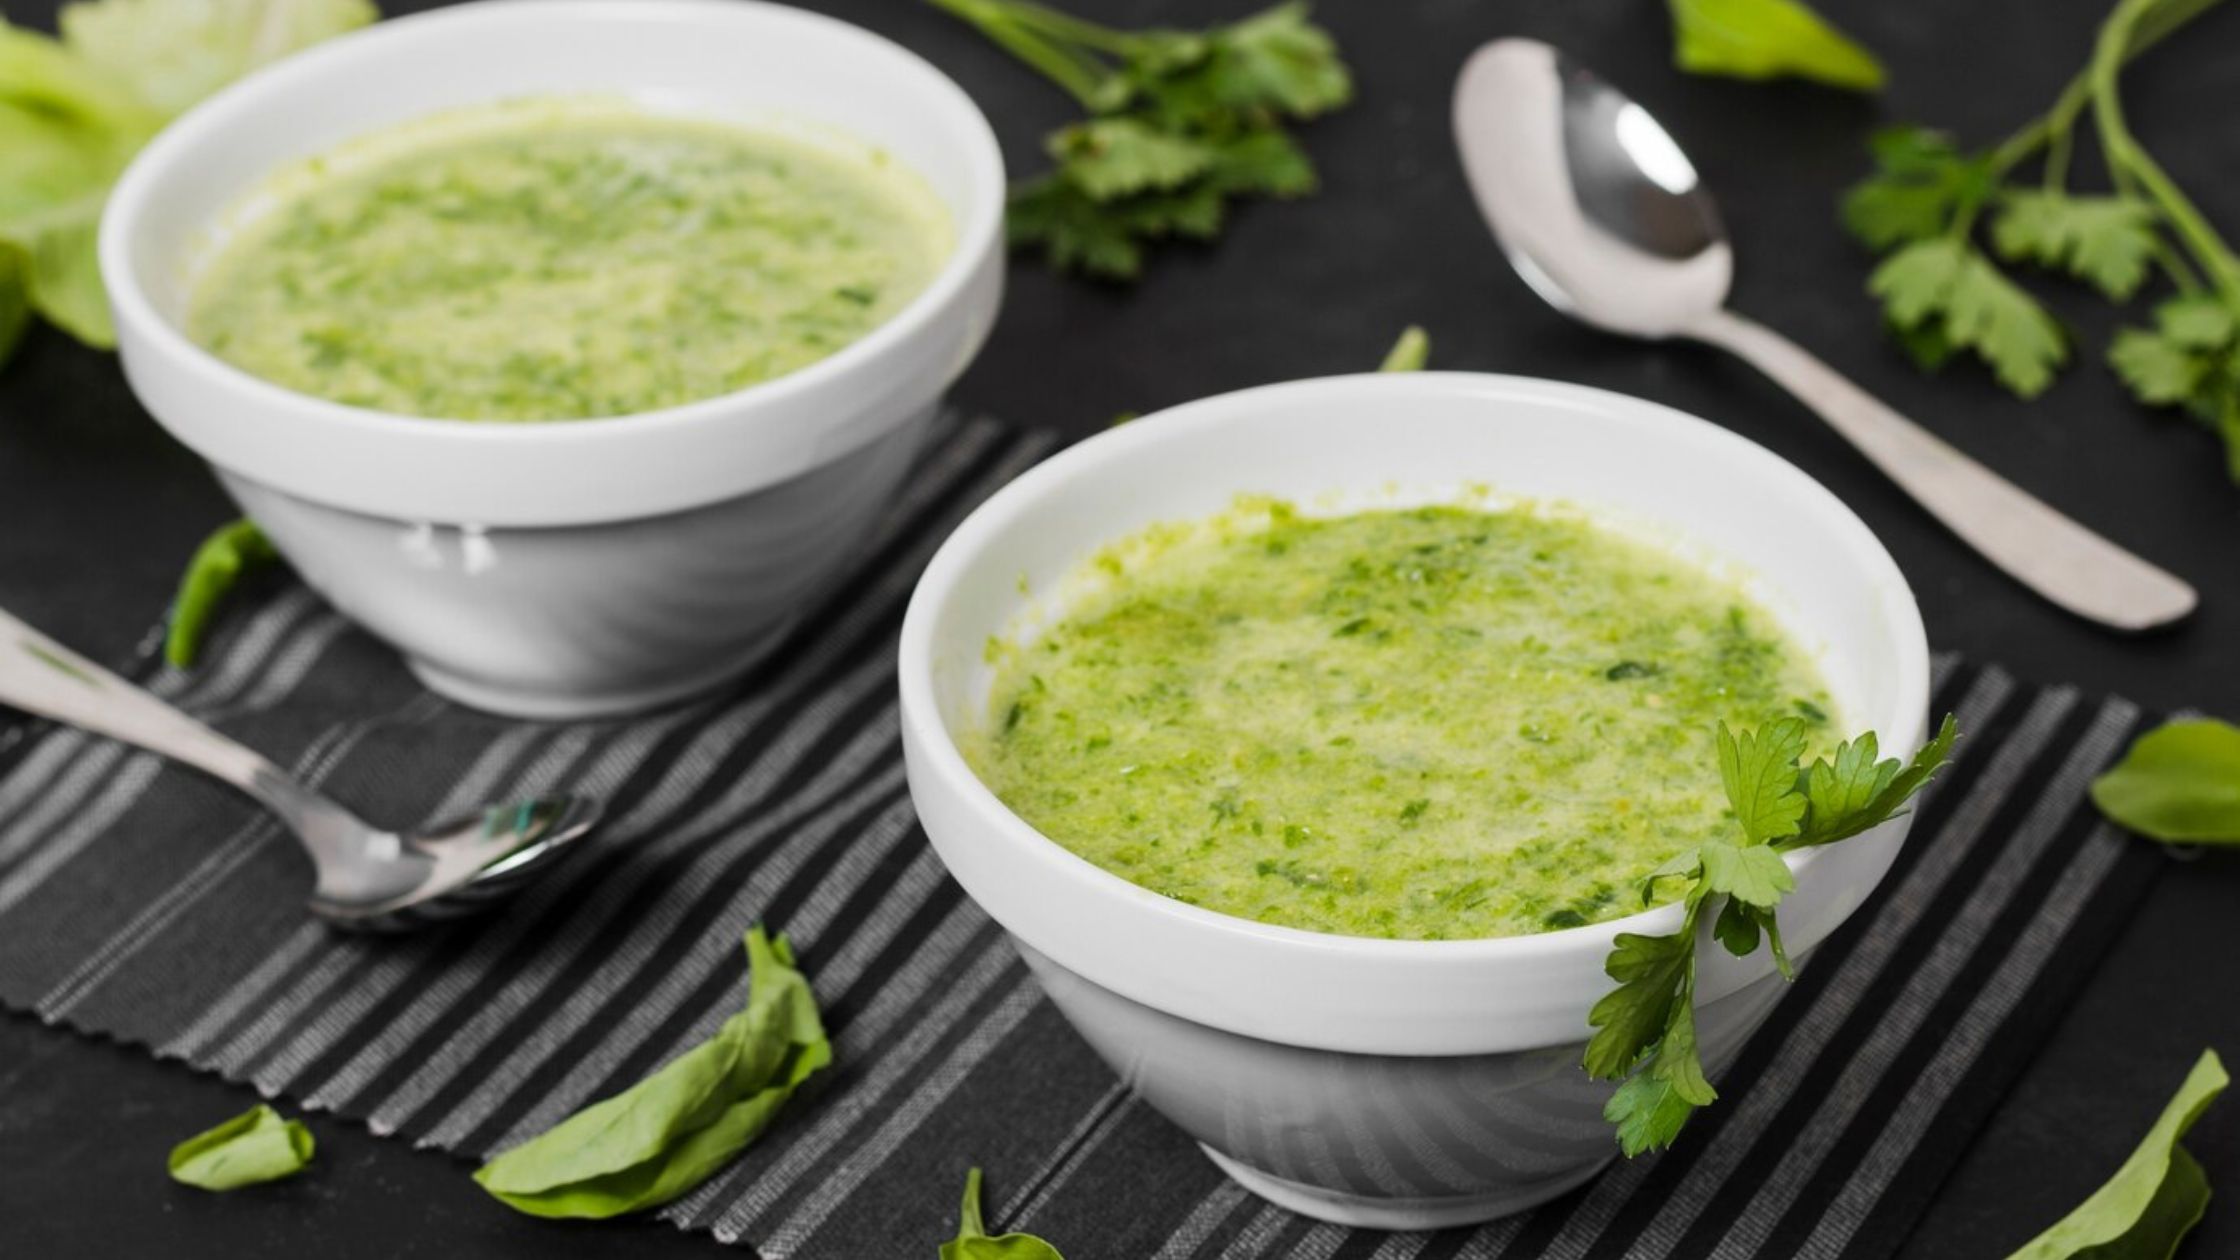 A picture of soup bowls with parsley